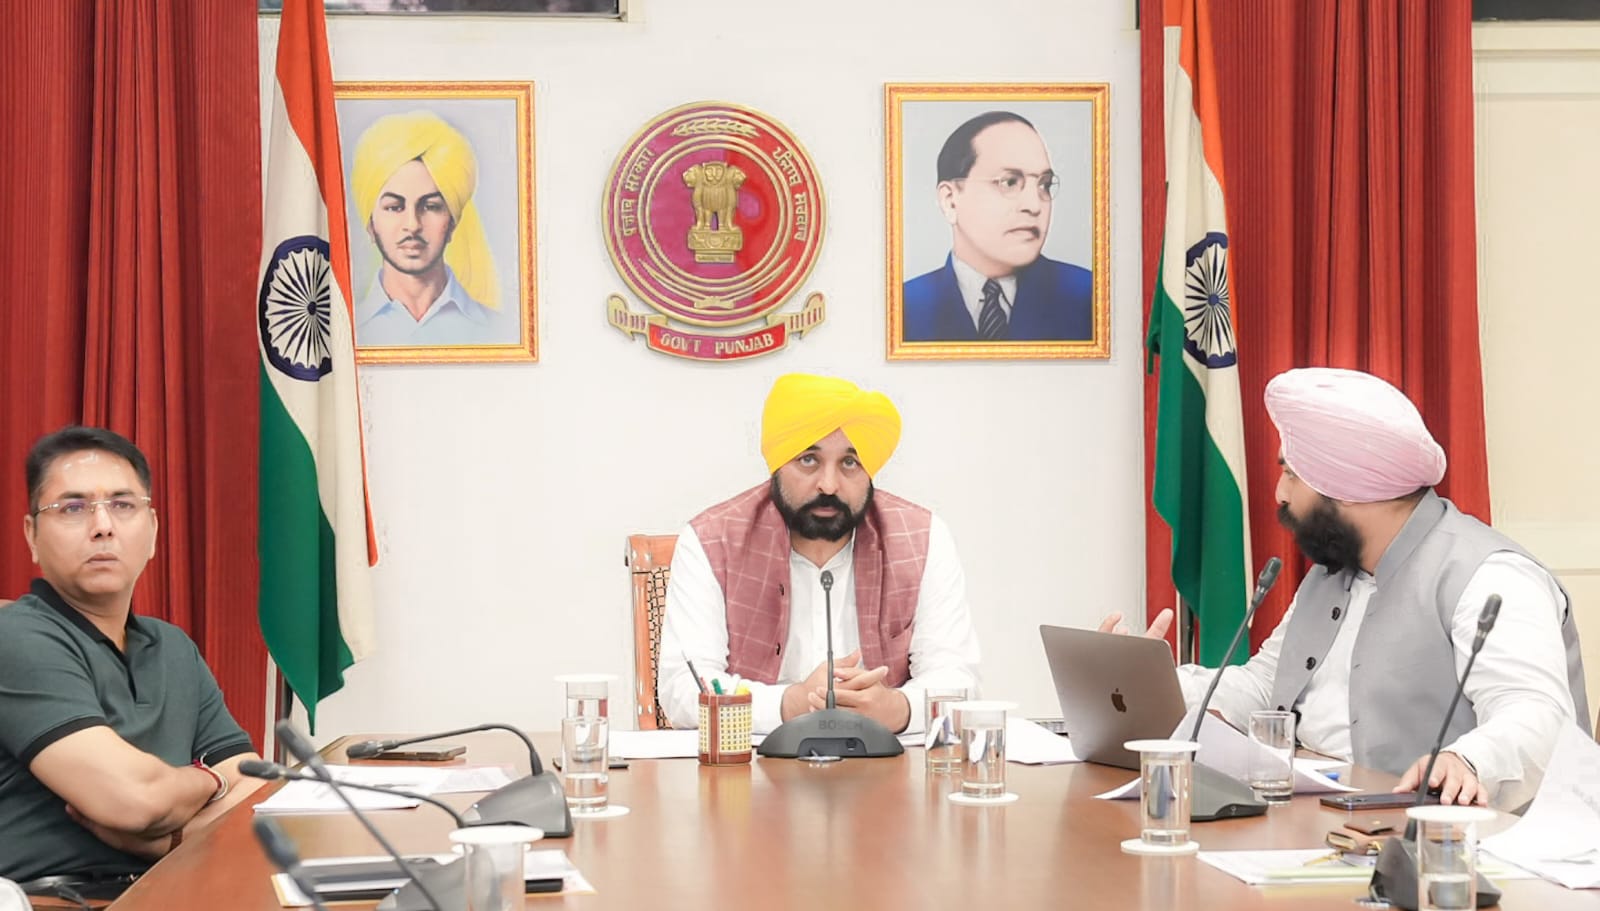 PUNJAB TO OPEN EIGHT ULTRA MODERN TRAINING CENTRES FOR IMPARTING UPSC COACHING TO ASPIRANTS: CM 